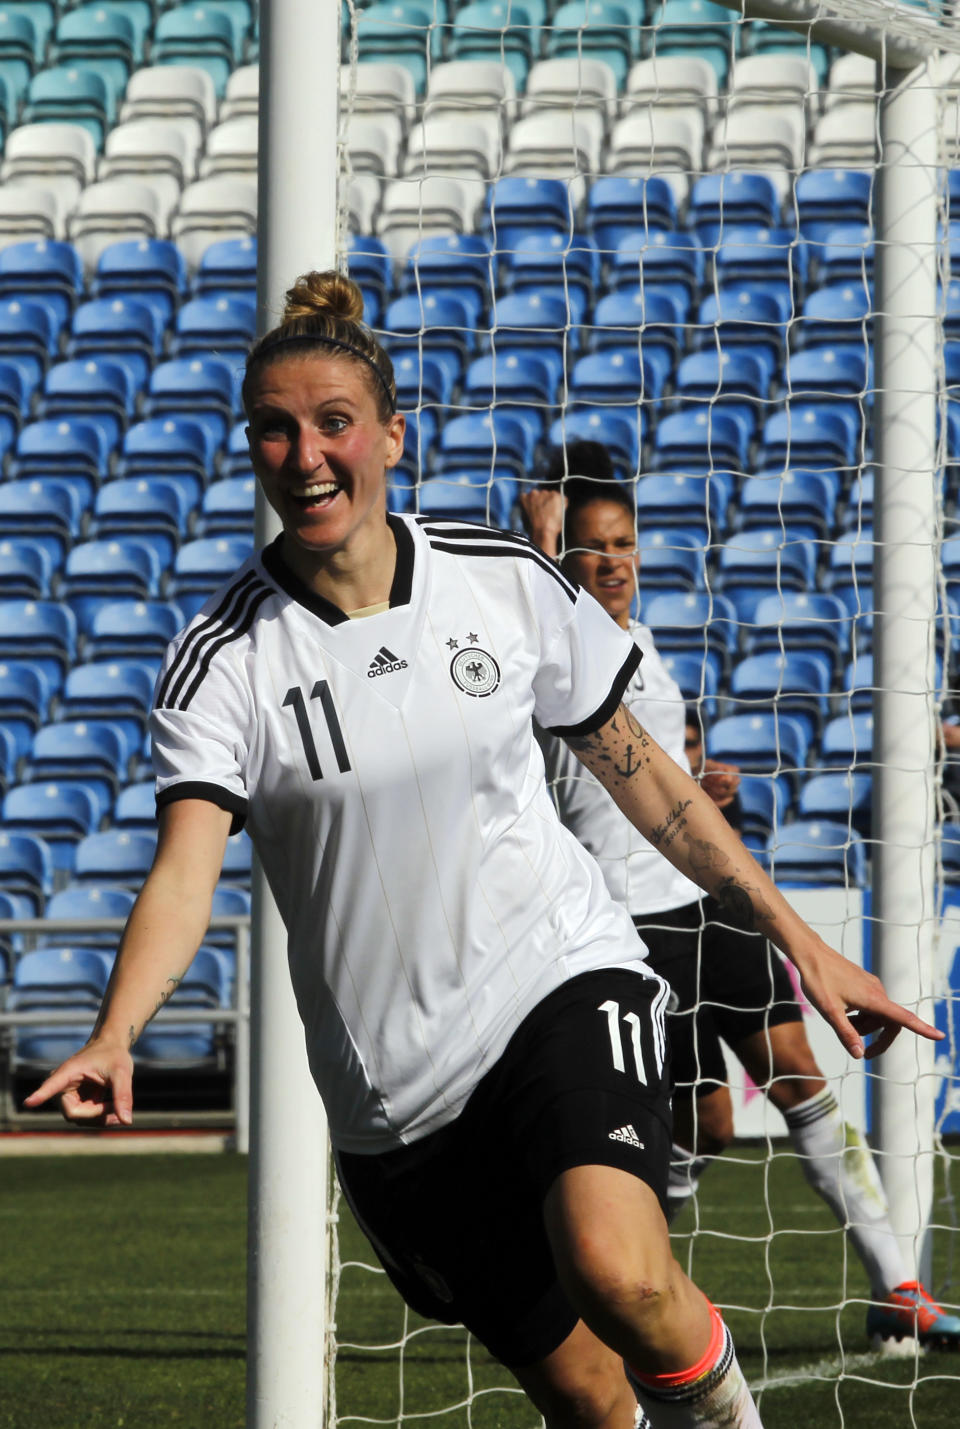 Germany's Anja Mittag celebrates after scoring her side's second goal during the women's soccer Algarve Cup final match between Germany and Japan at the Algarve stadium, outside Faro, southern Portugal, Wednesday, March 12, 2014. (AP Photo/Francisco Seco)